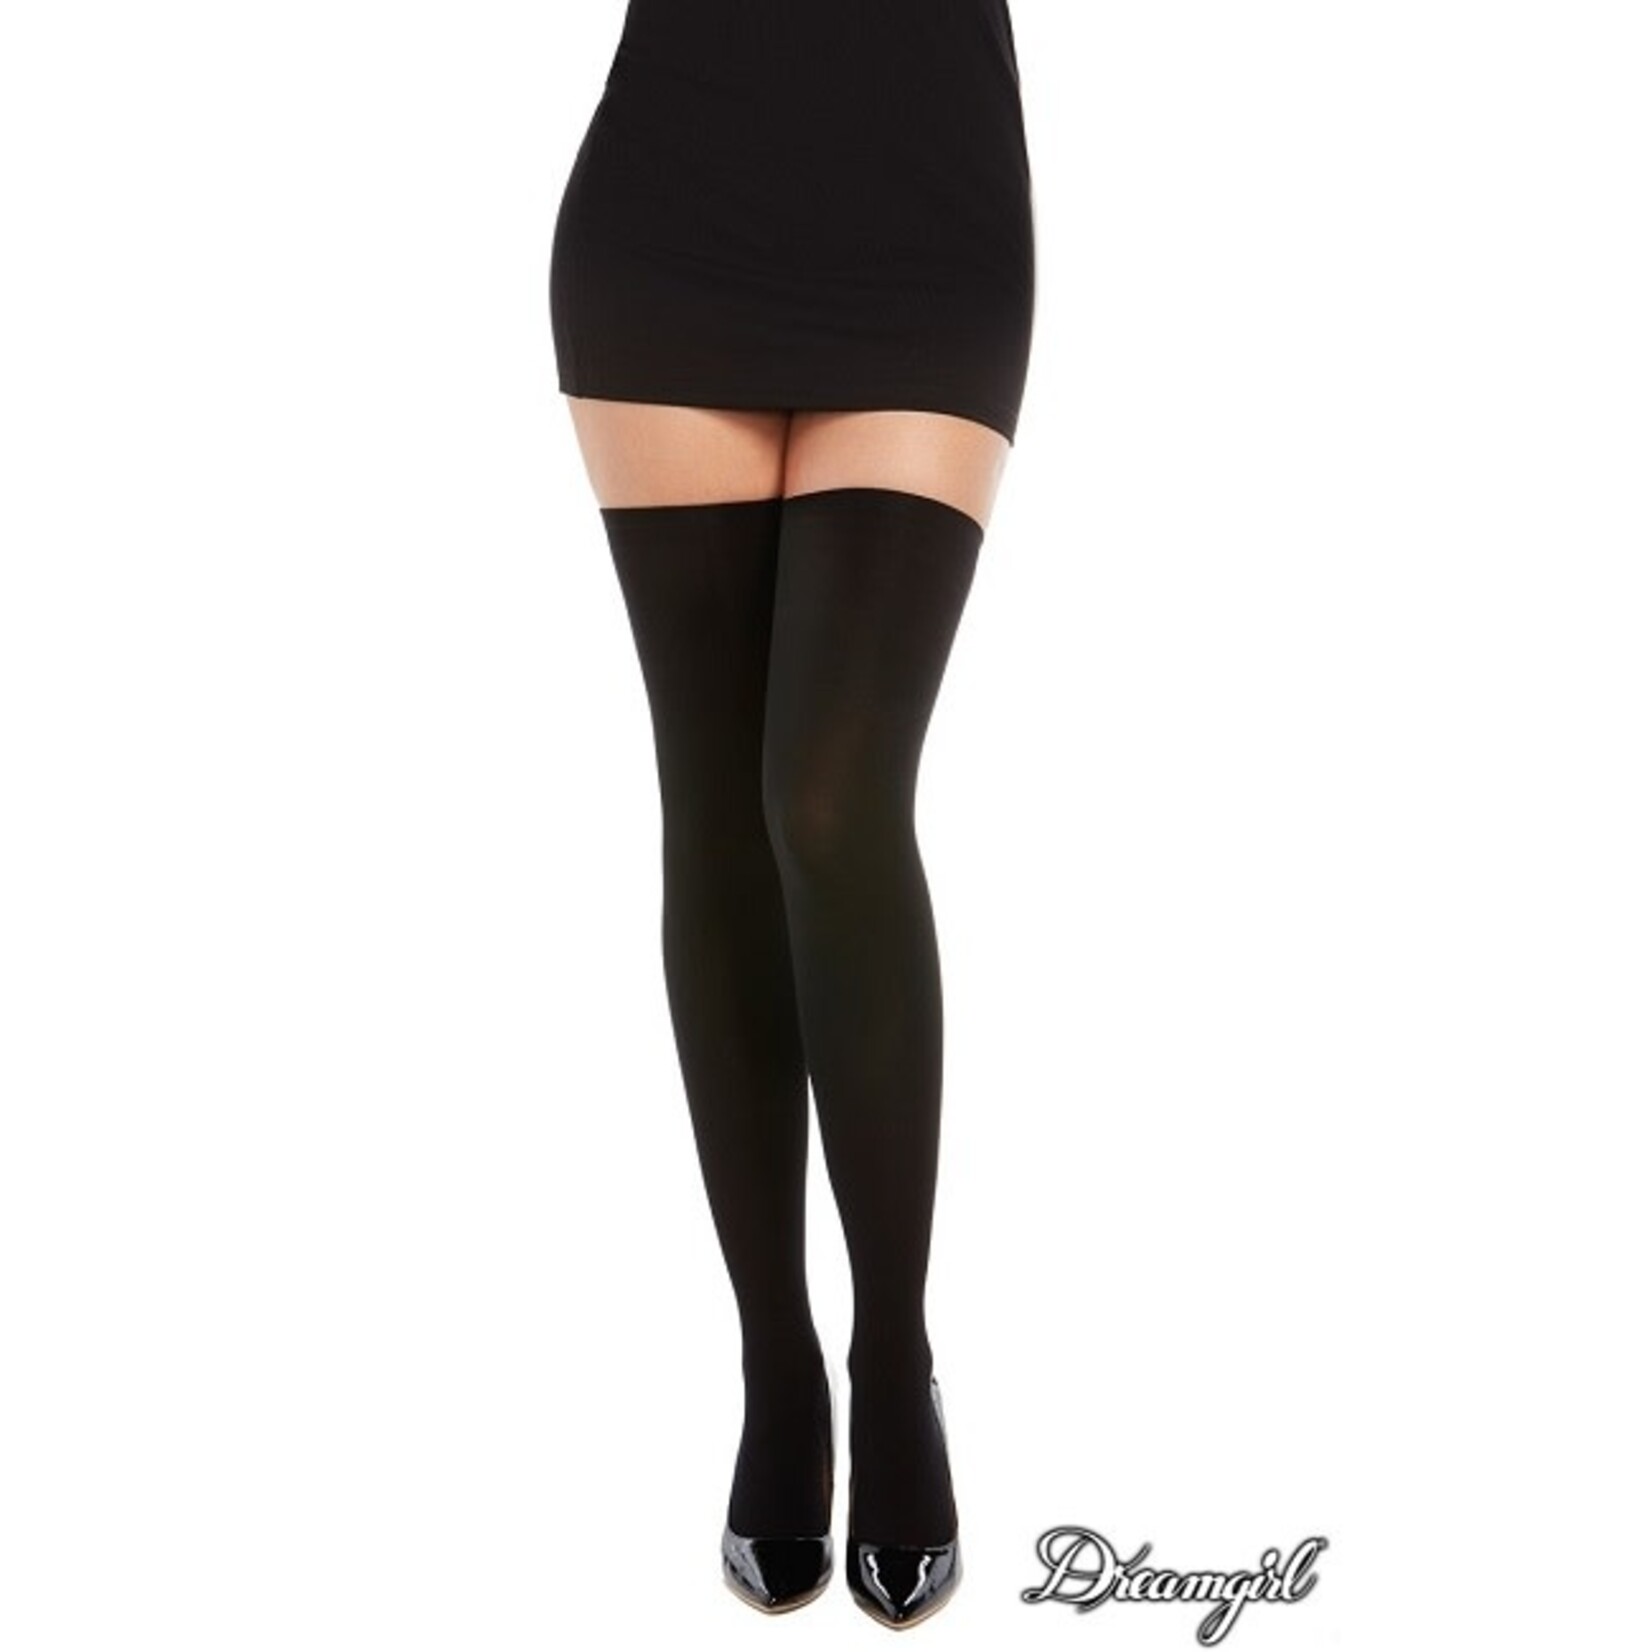 Dreamgirl Dreamgirl Opaque Black Criss-Cross Stockings OS